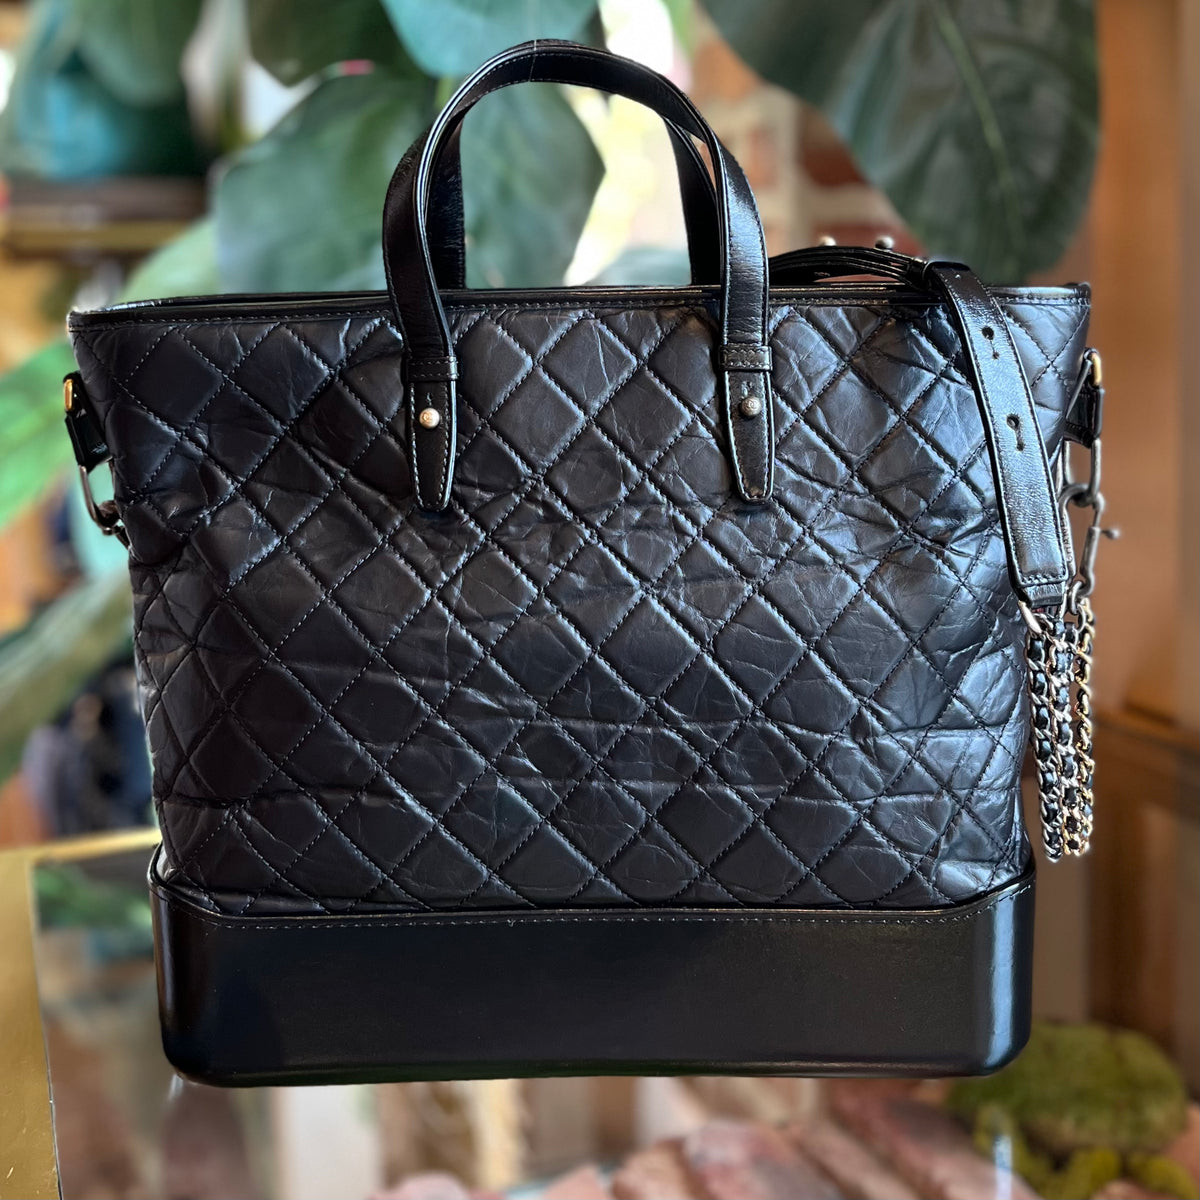 CHANEL Black Aged Calfskin Quilted Large Gabrielle Shopping Tote